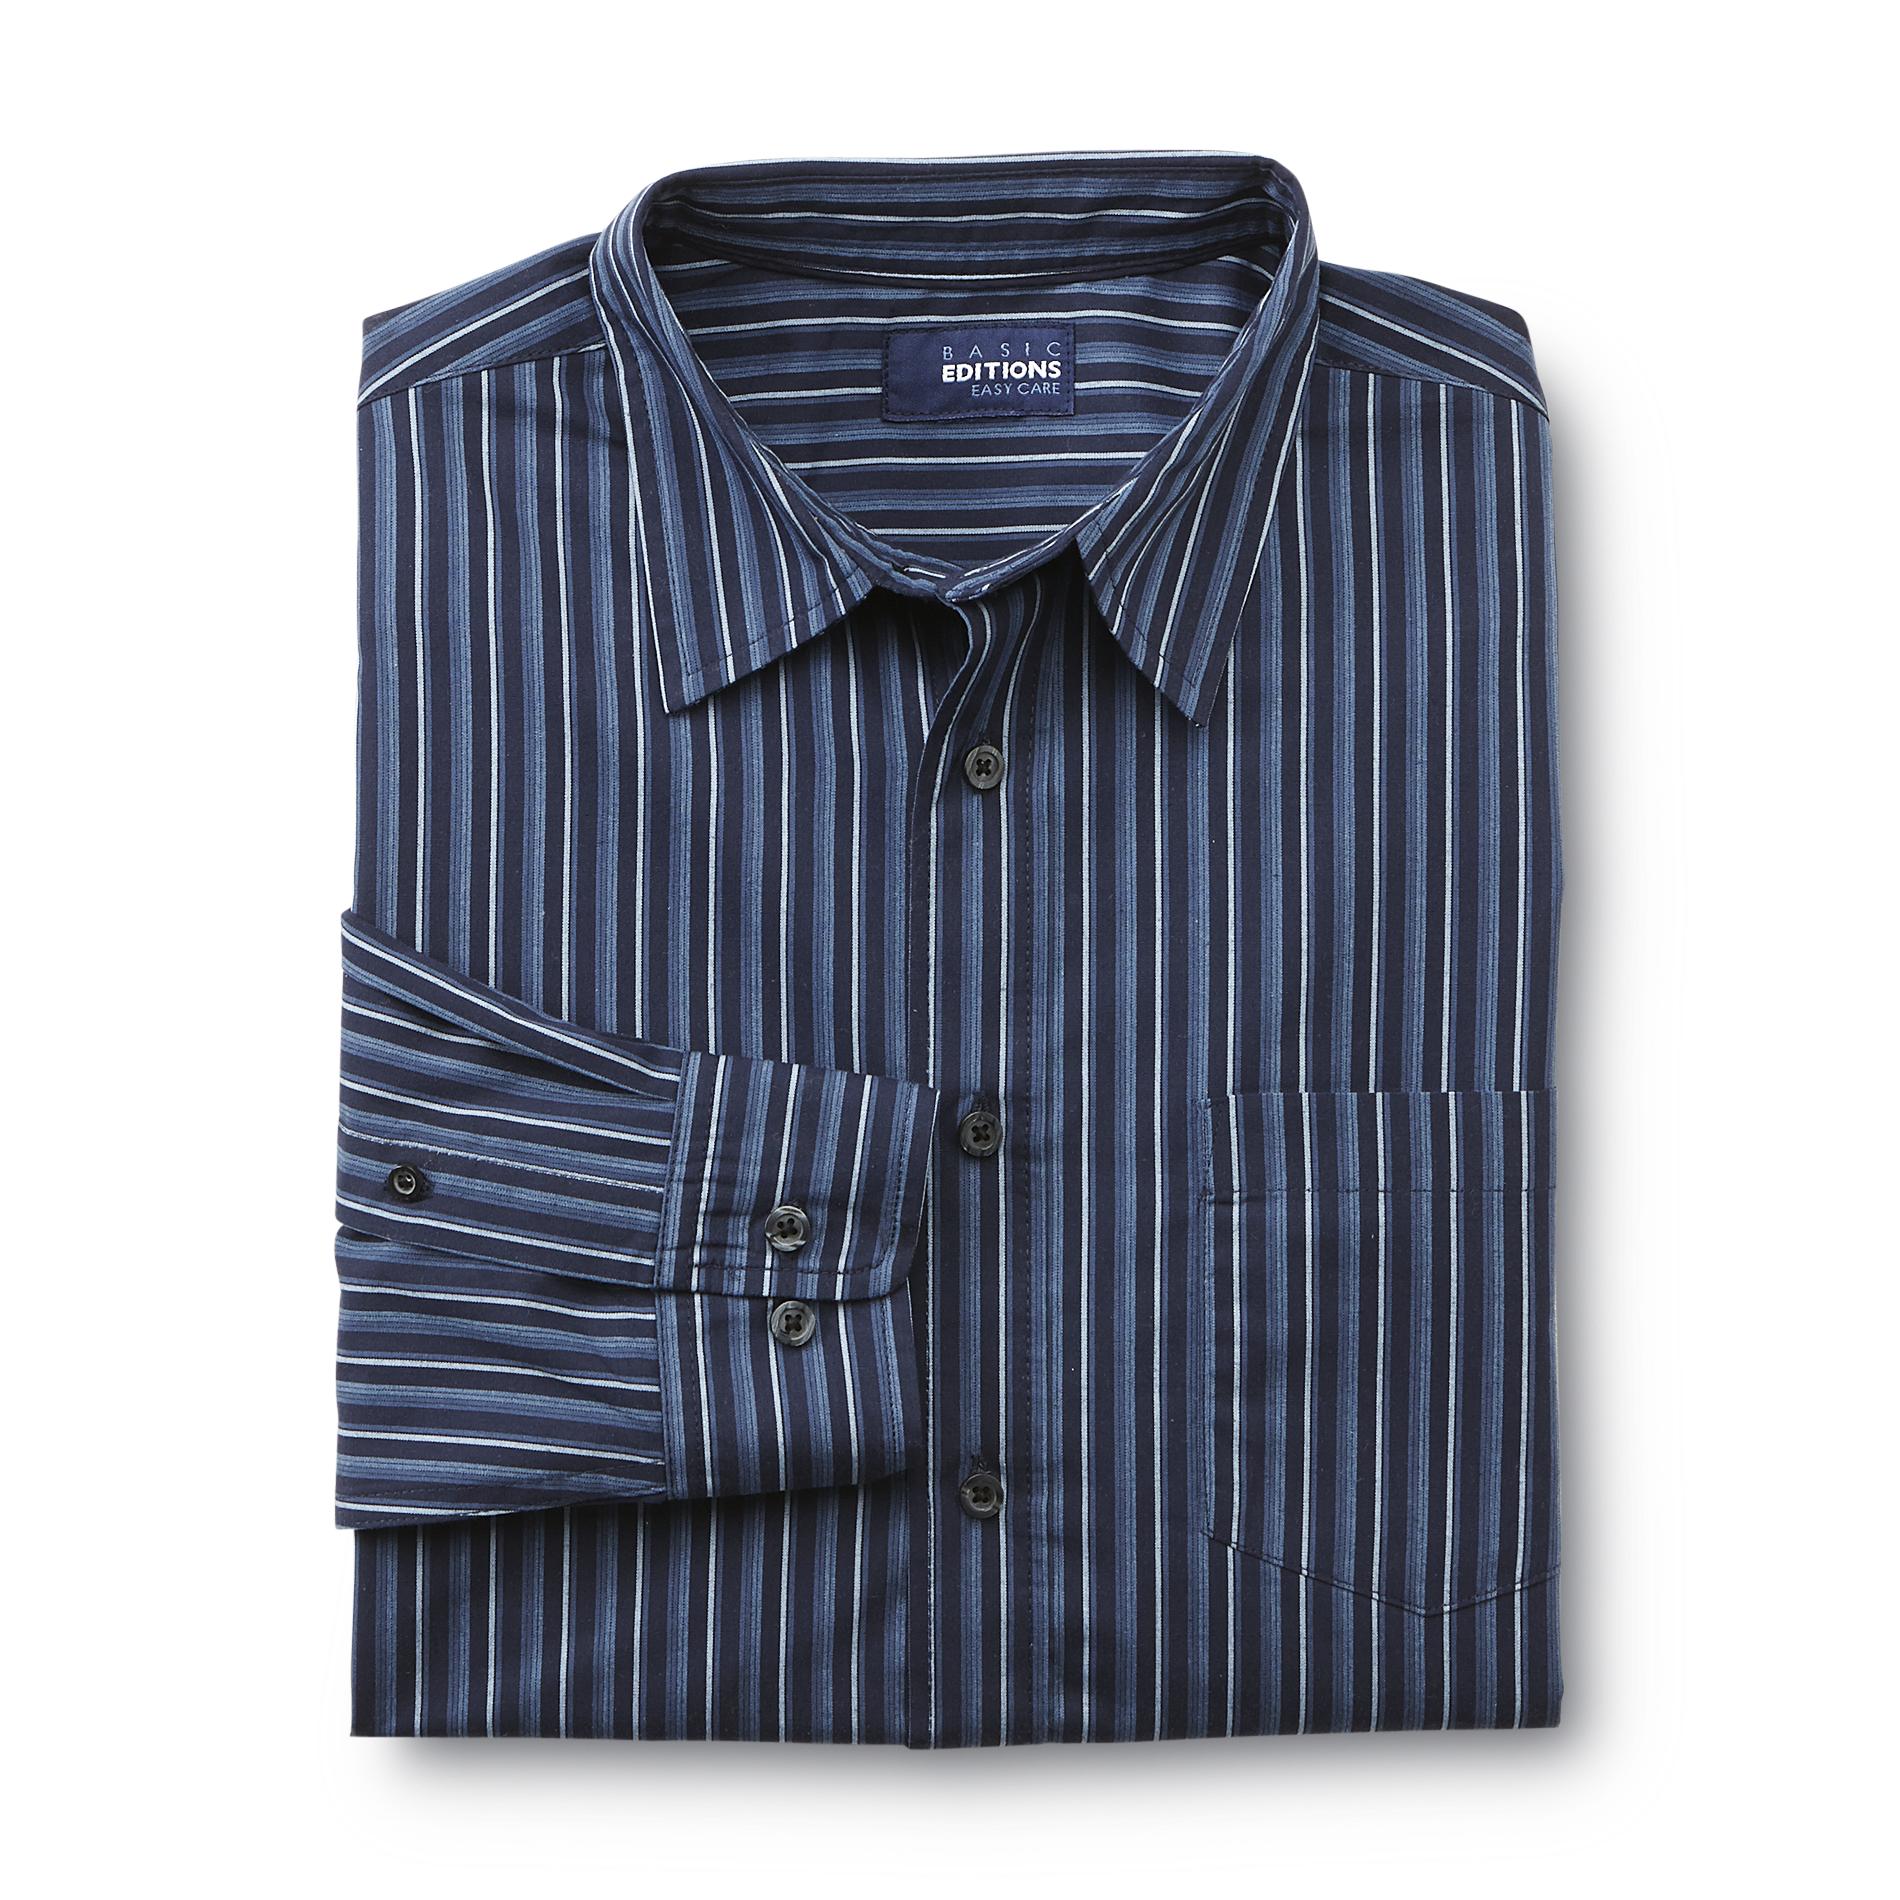 Basic Editions Men's Big & Tall Easy Care Dress Shirt - Striped